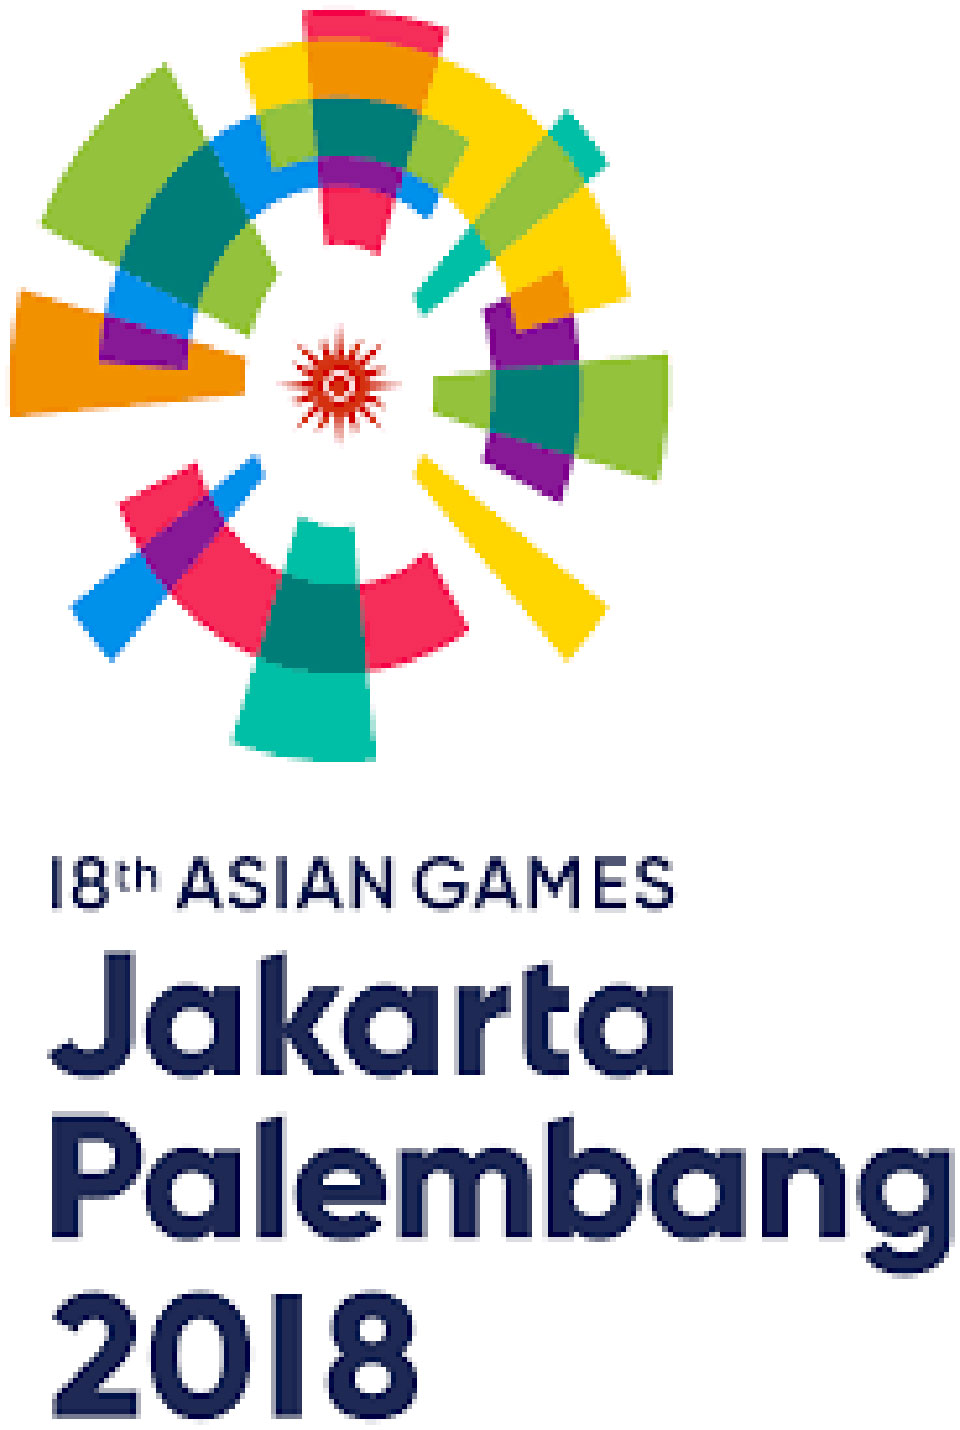 31 officials accompany players to Asian Games, costing millions